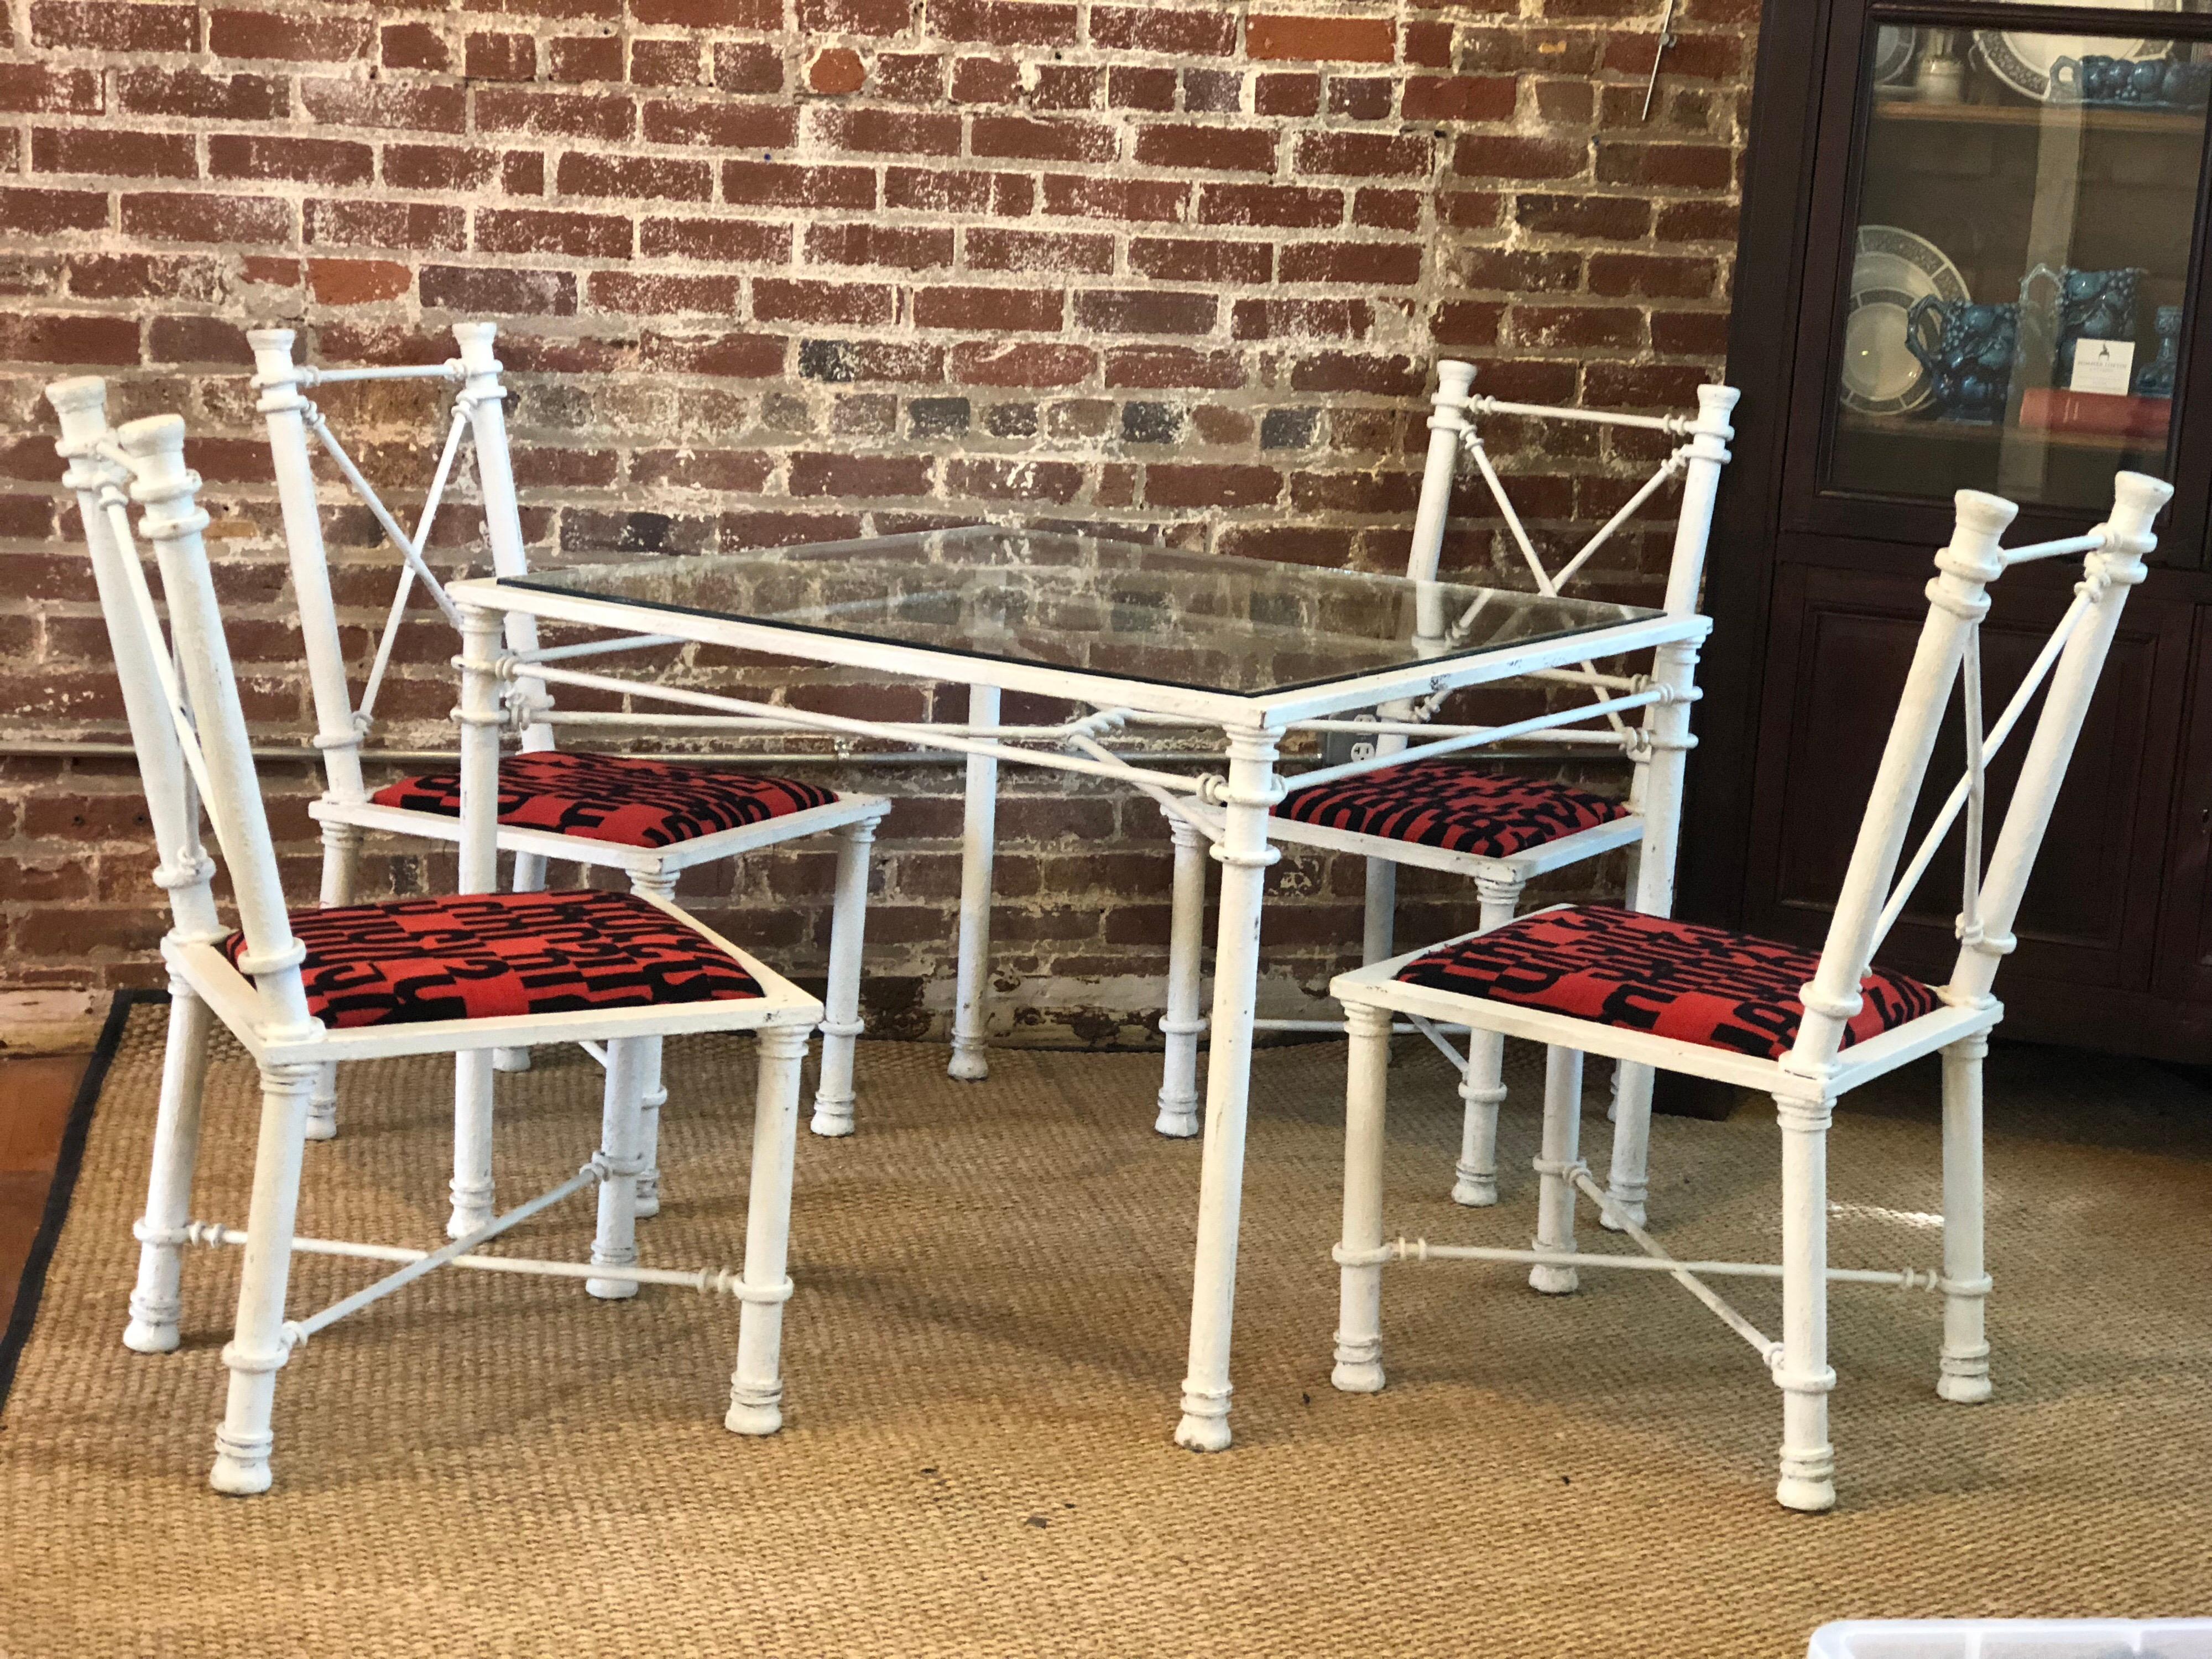 A vintage iron garden or patio set having a square glass top table and four chairs. The table and chairs have a rustic white paint finish and unusual decorative neoclassical faux rope ties as stretchers. The table measures 40 inches square by 28.75